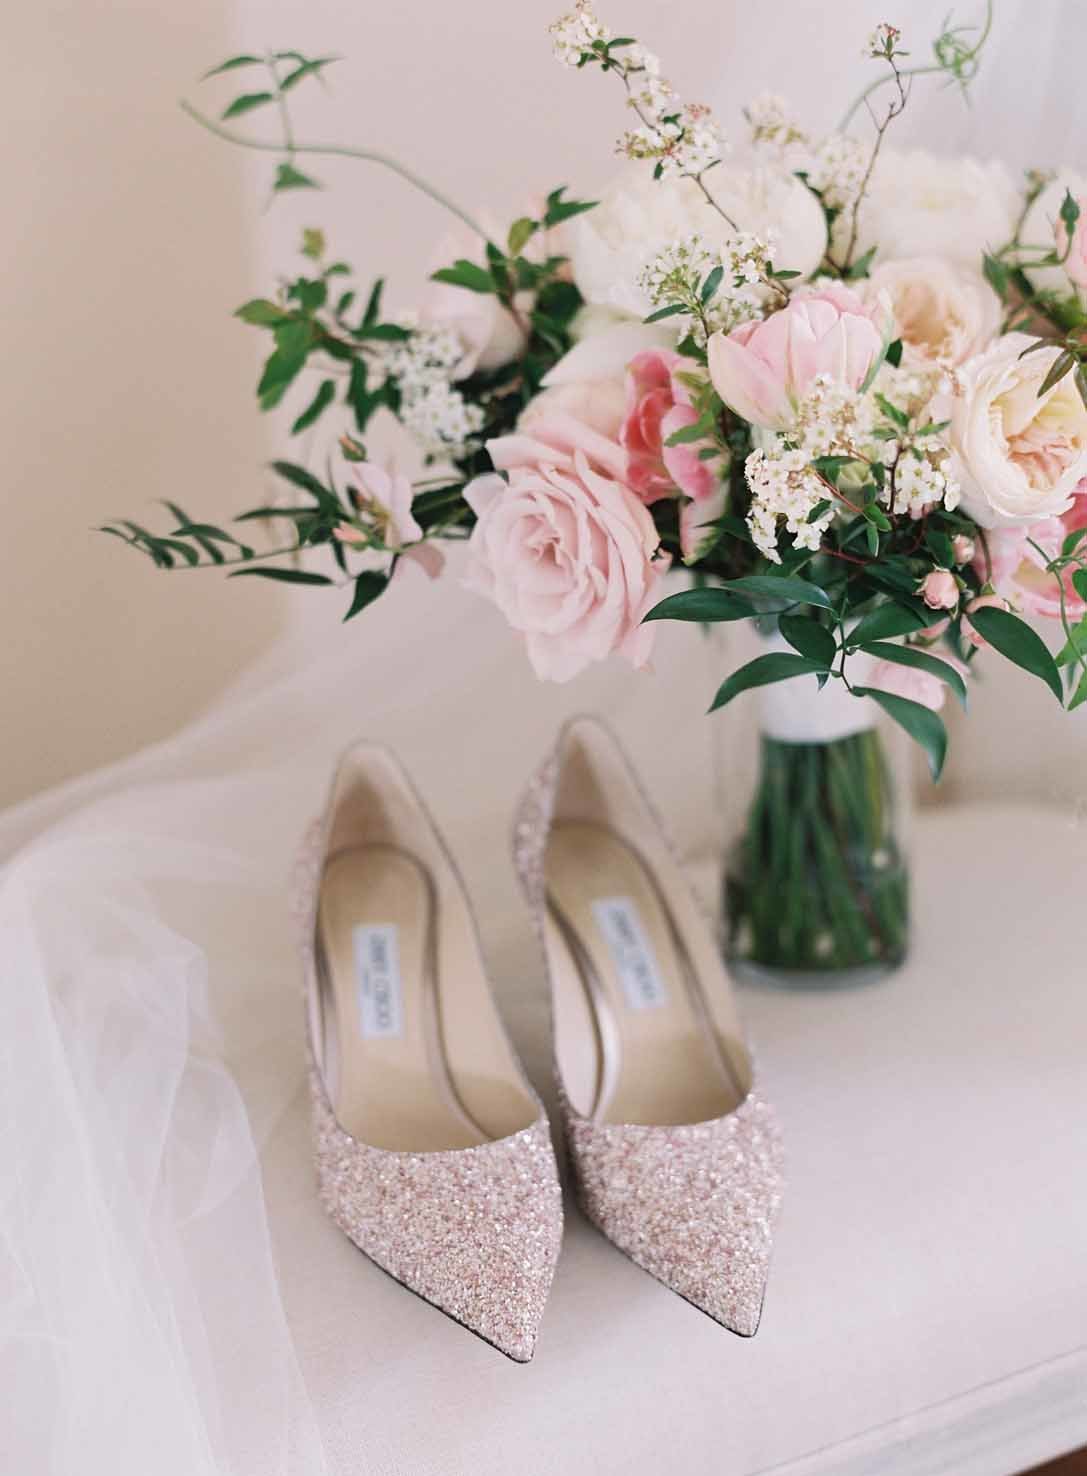 sparkly gold bridal shoes with bridal bouquet